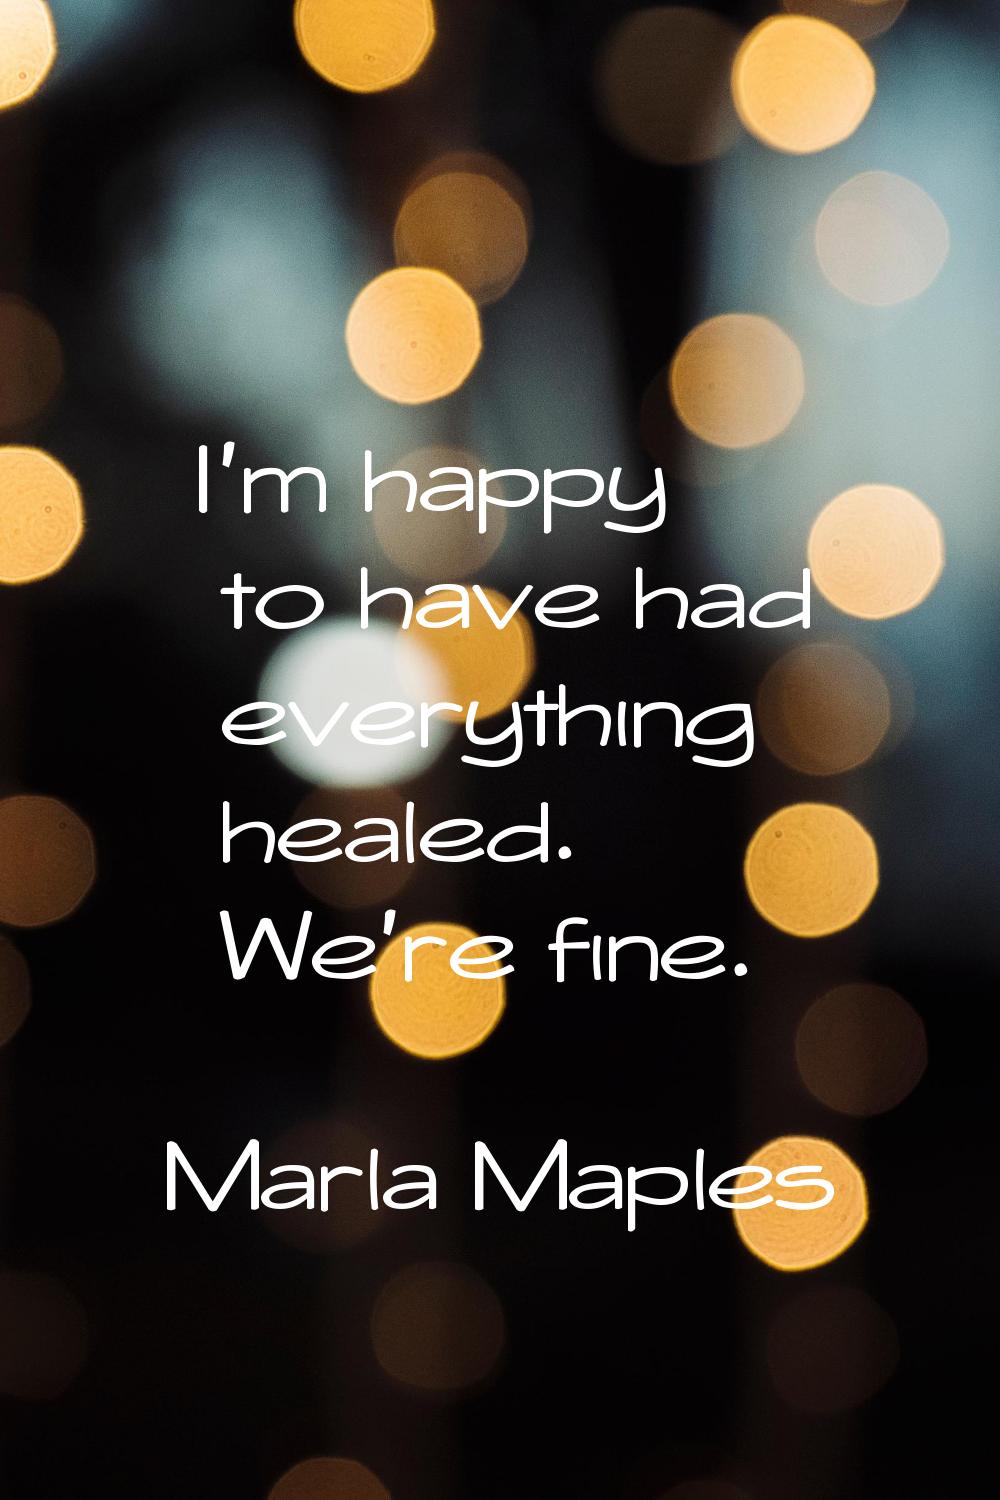 I'm happy to have had everything healed. We're fine.